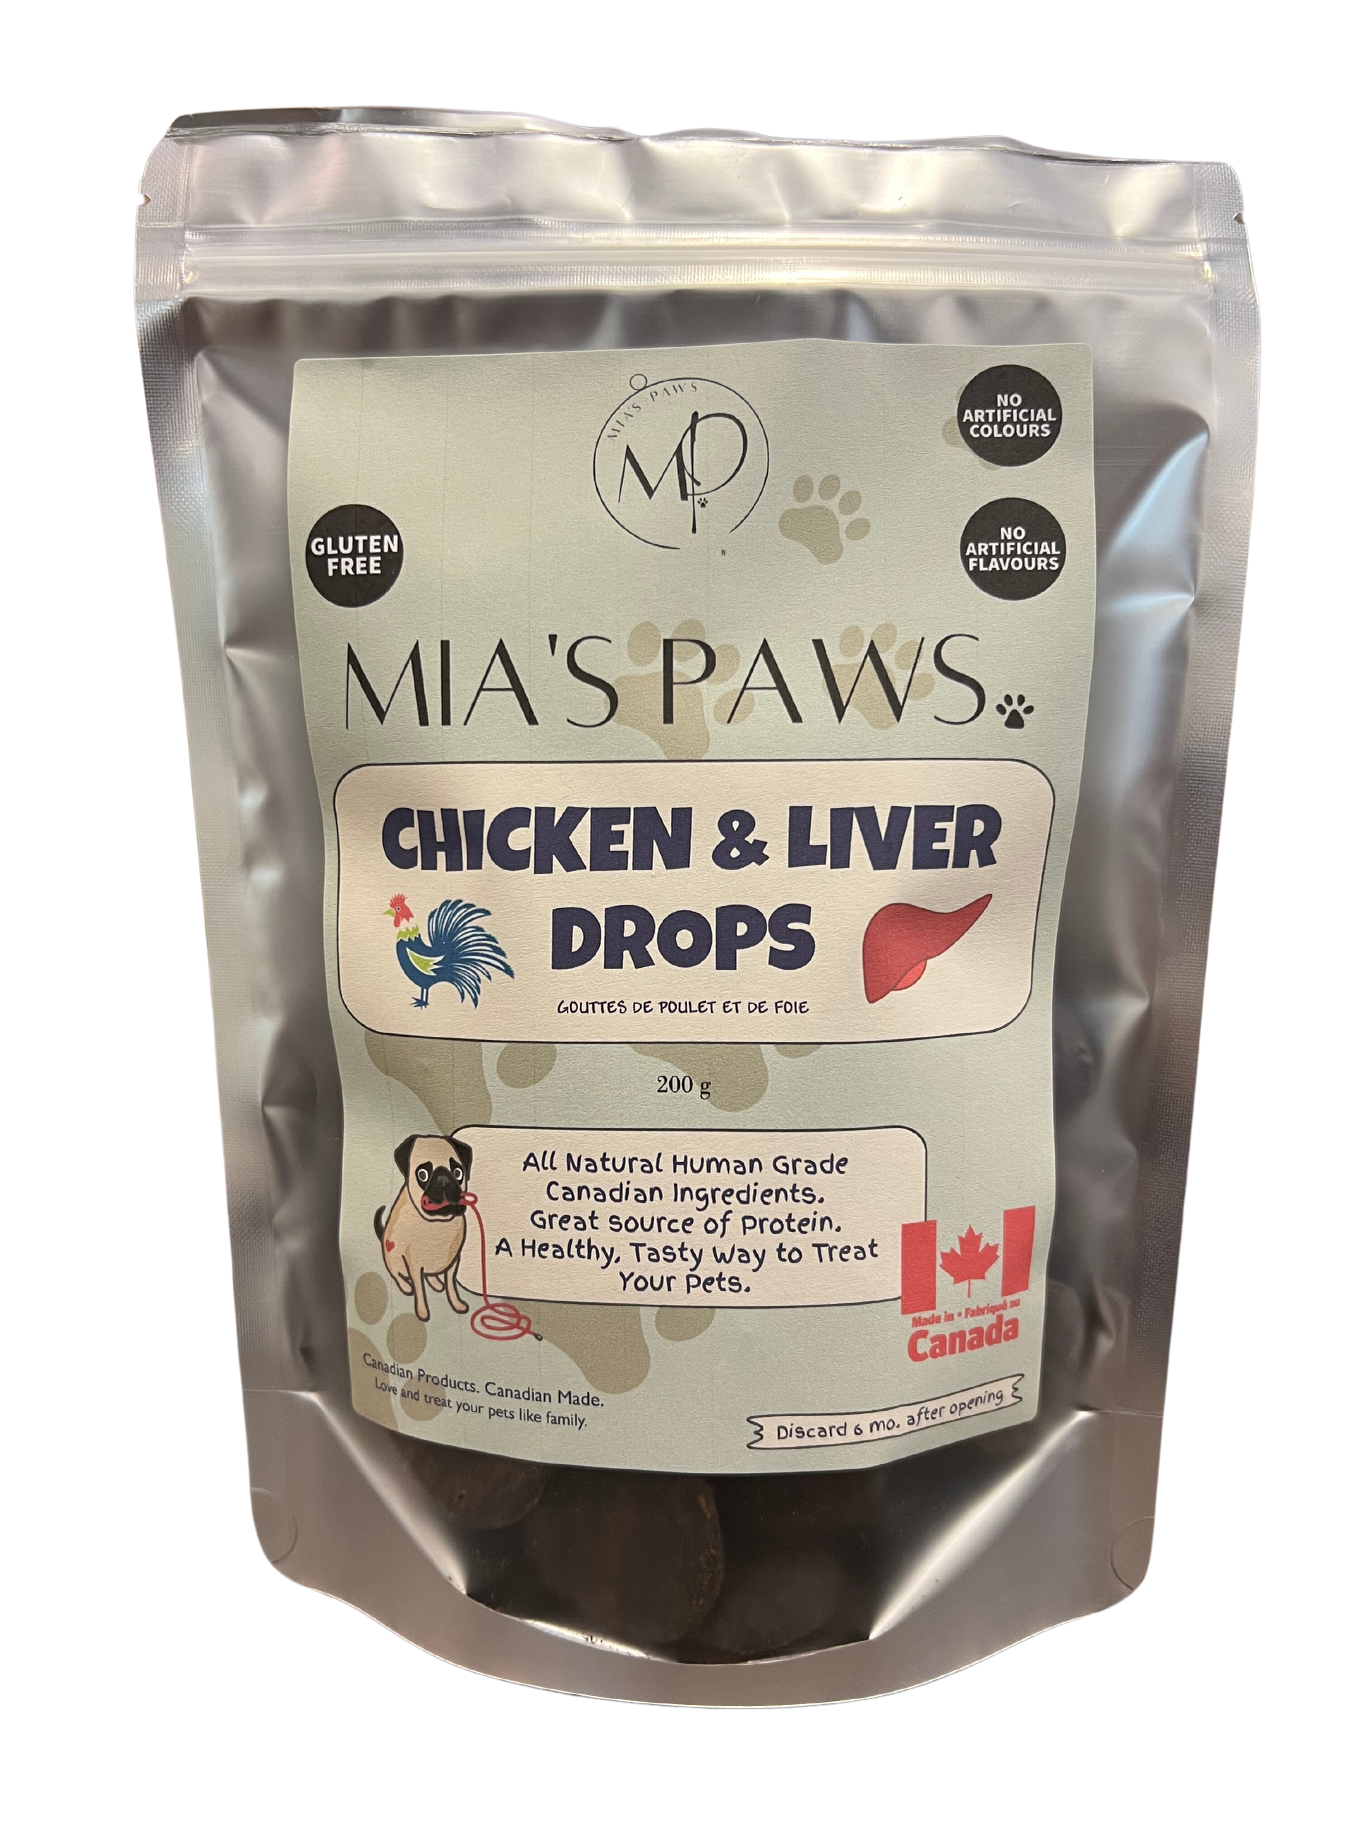 Chicken and Liver Drops - Mia's Paws